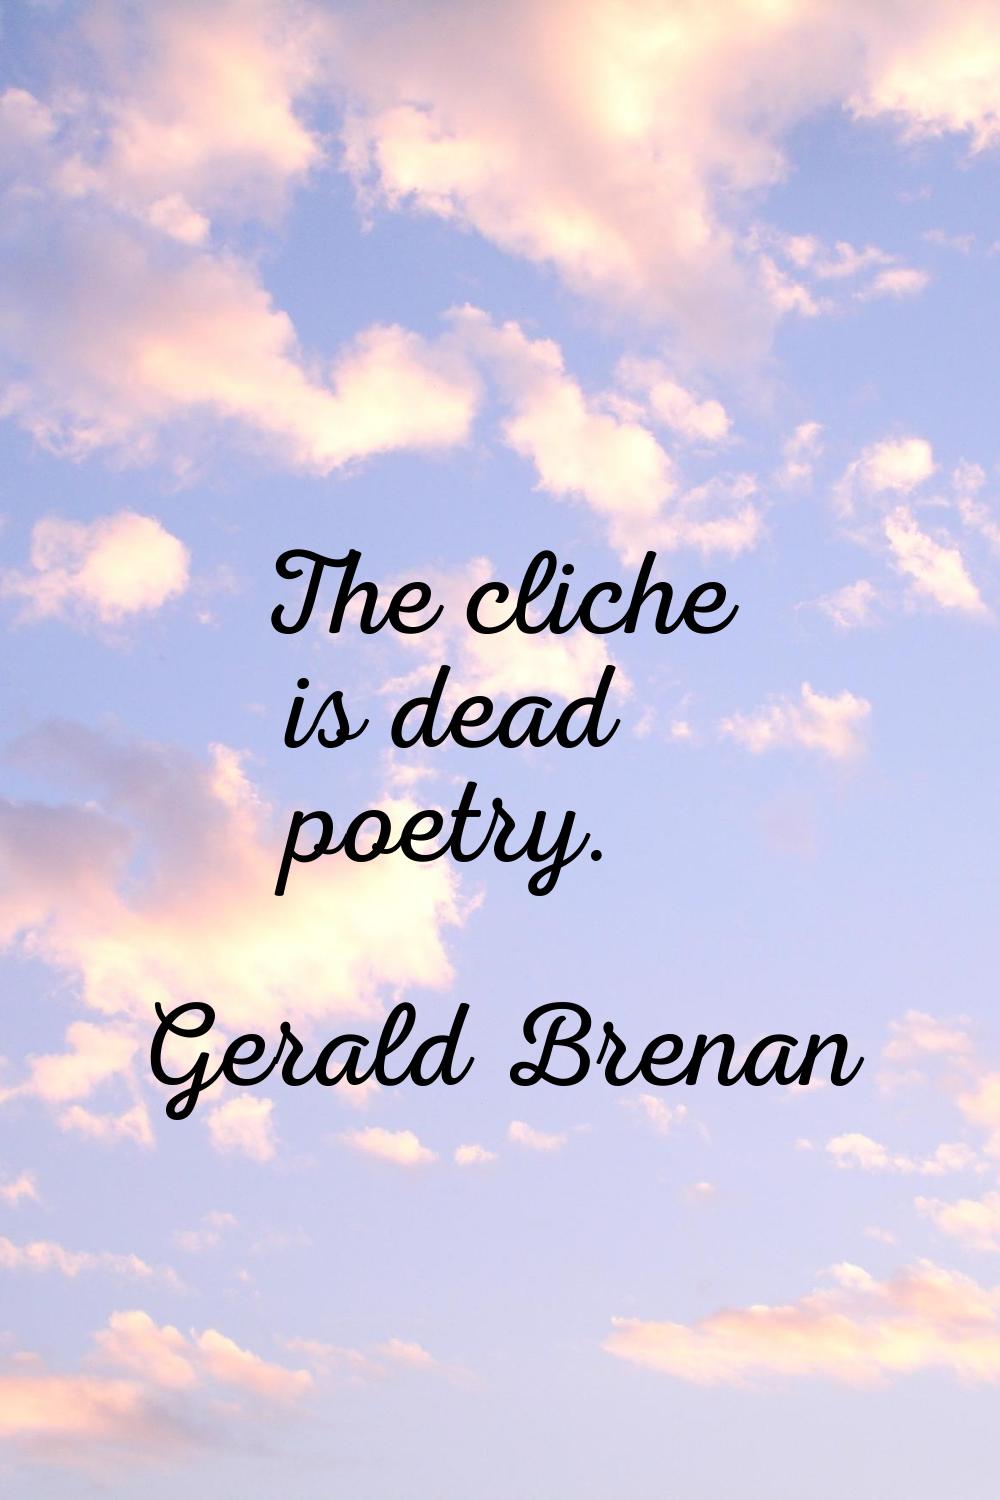 The cliche is dead poetry.